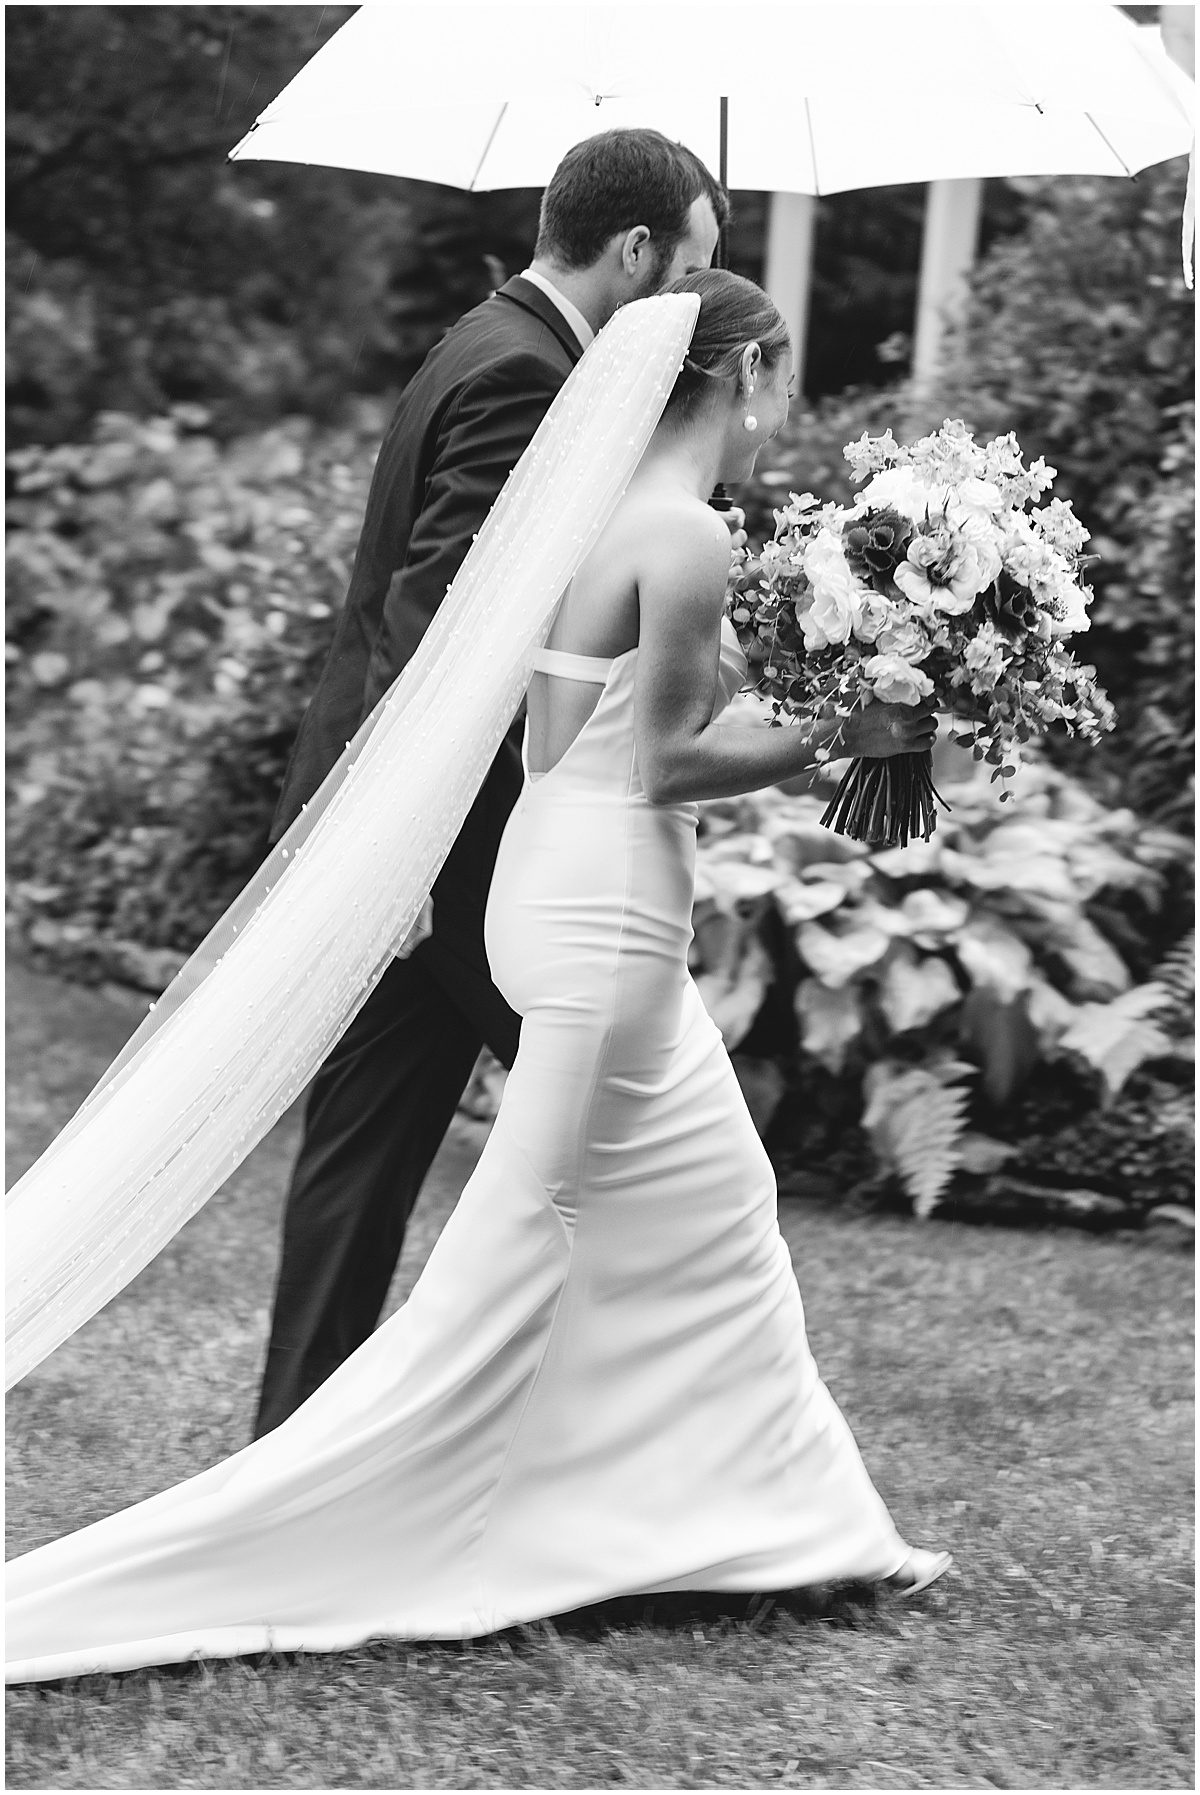 Black and White of Bride and Groom Walking Under Umbrella Photo